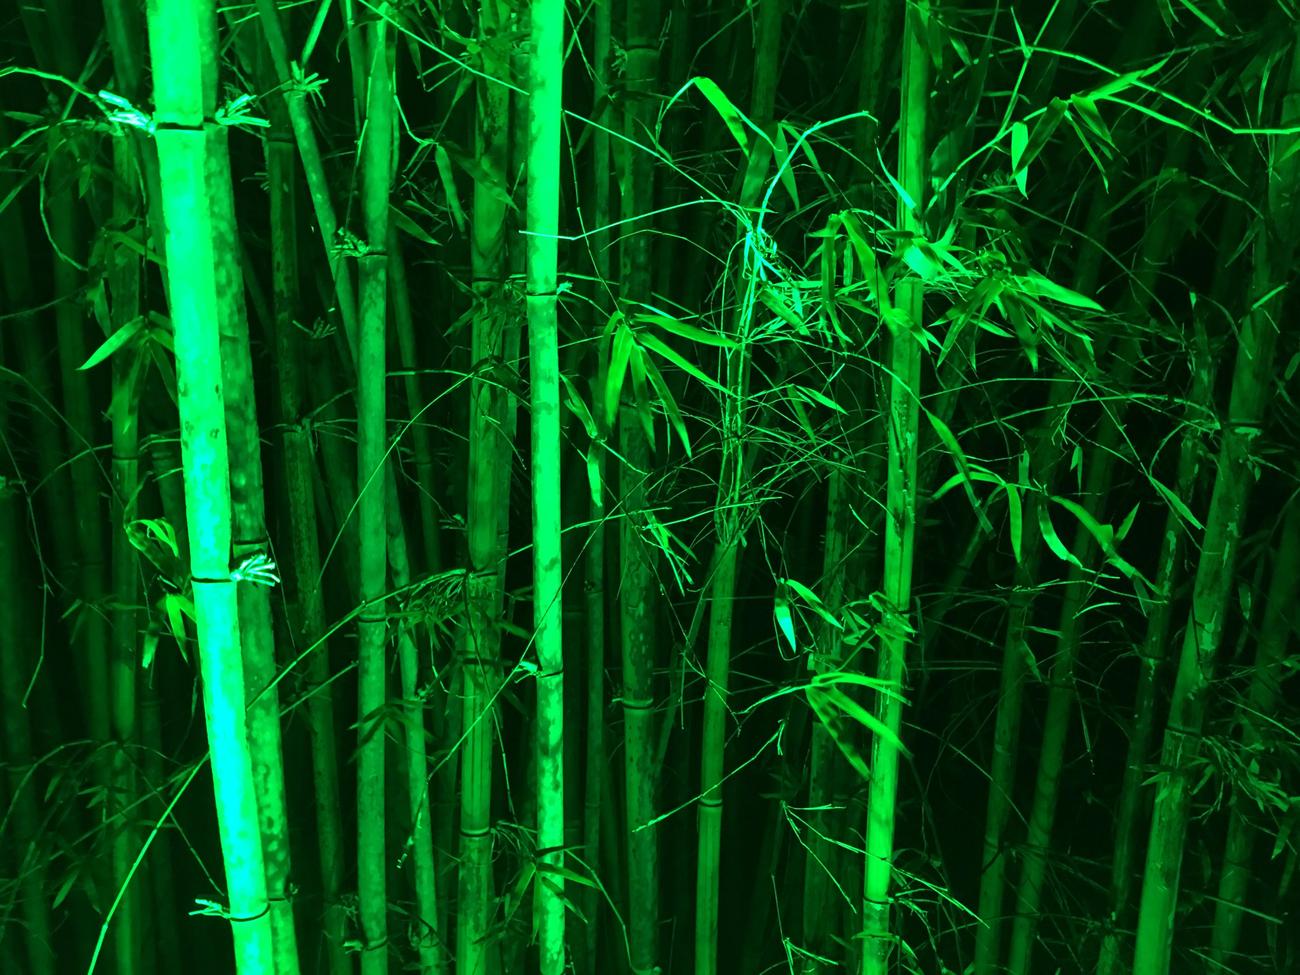 Cultural significance of bamboo